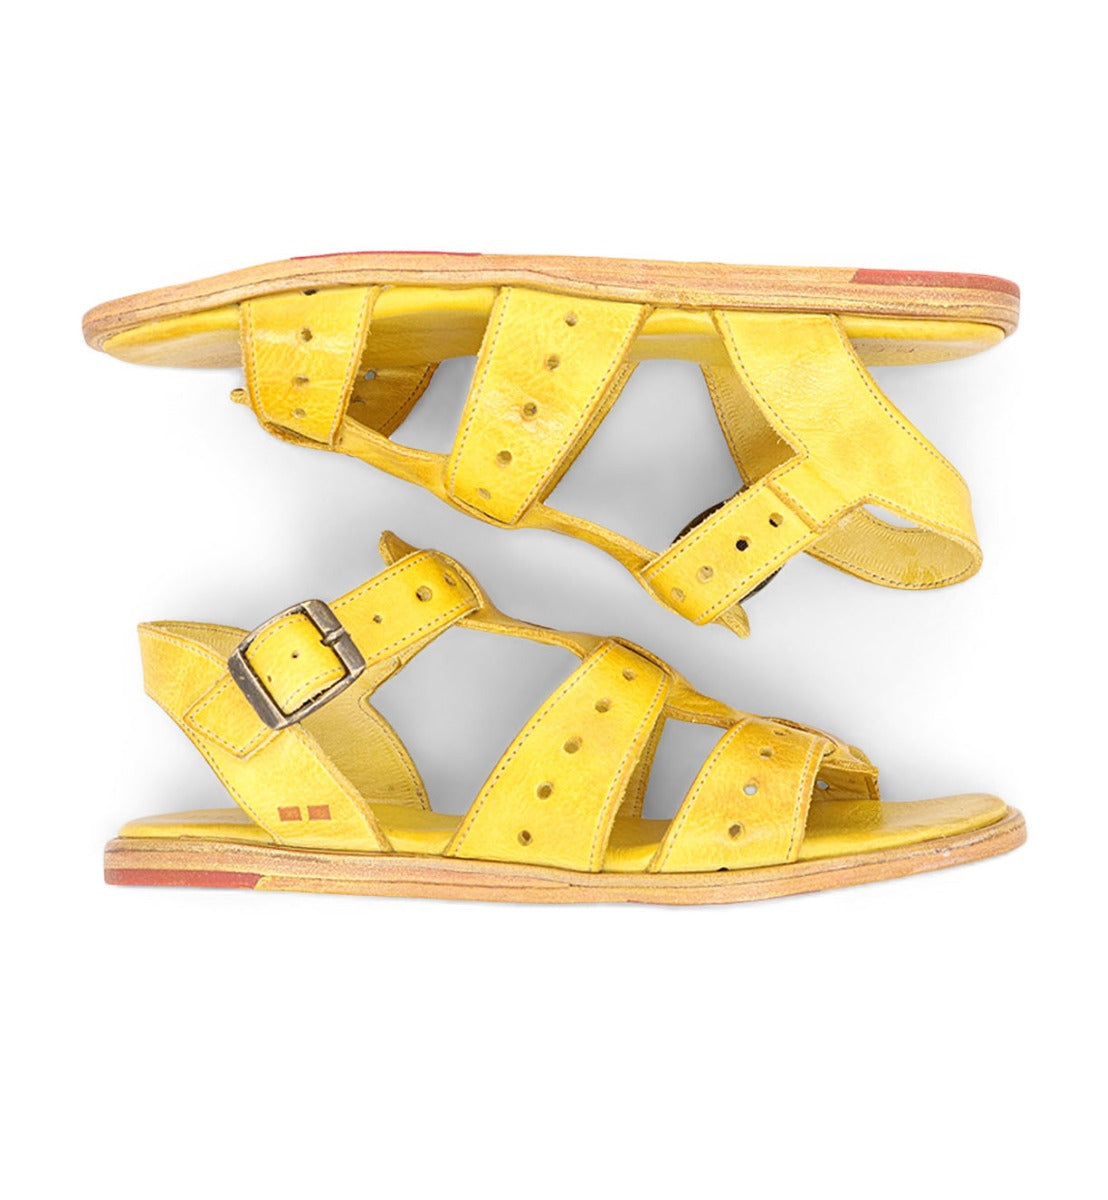 A pair of Sue sandals by Bed Stu on a white background.